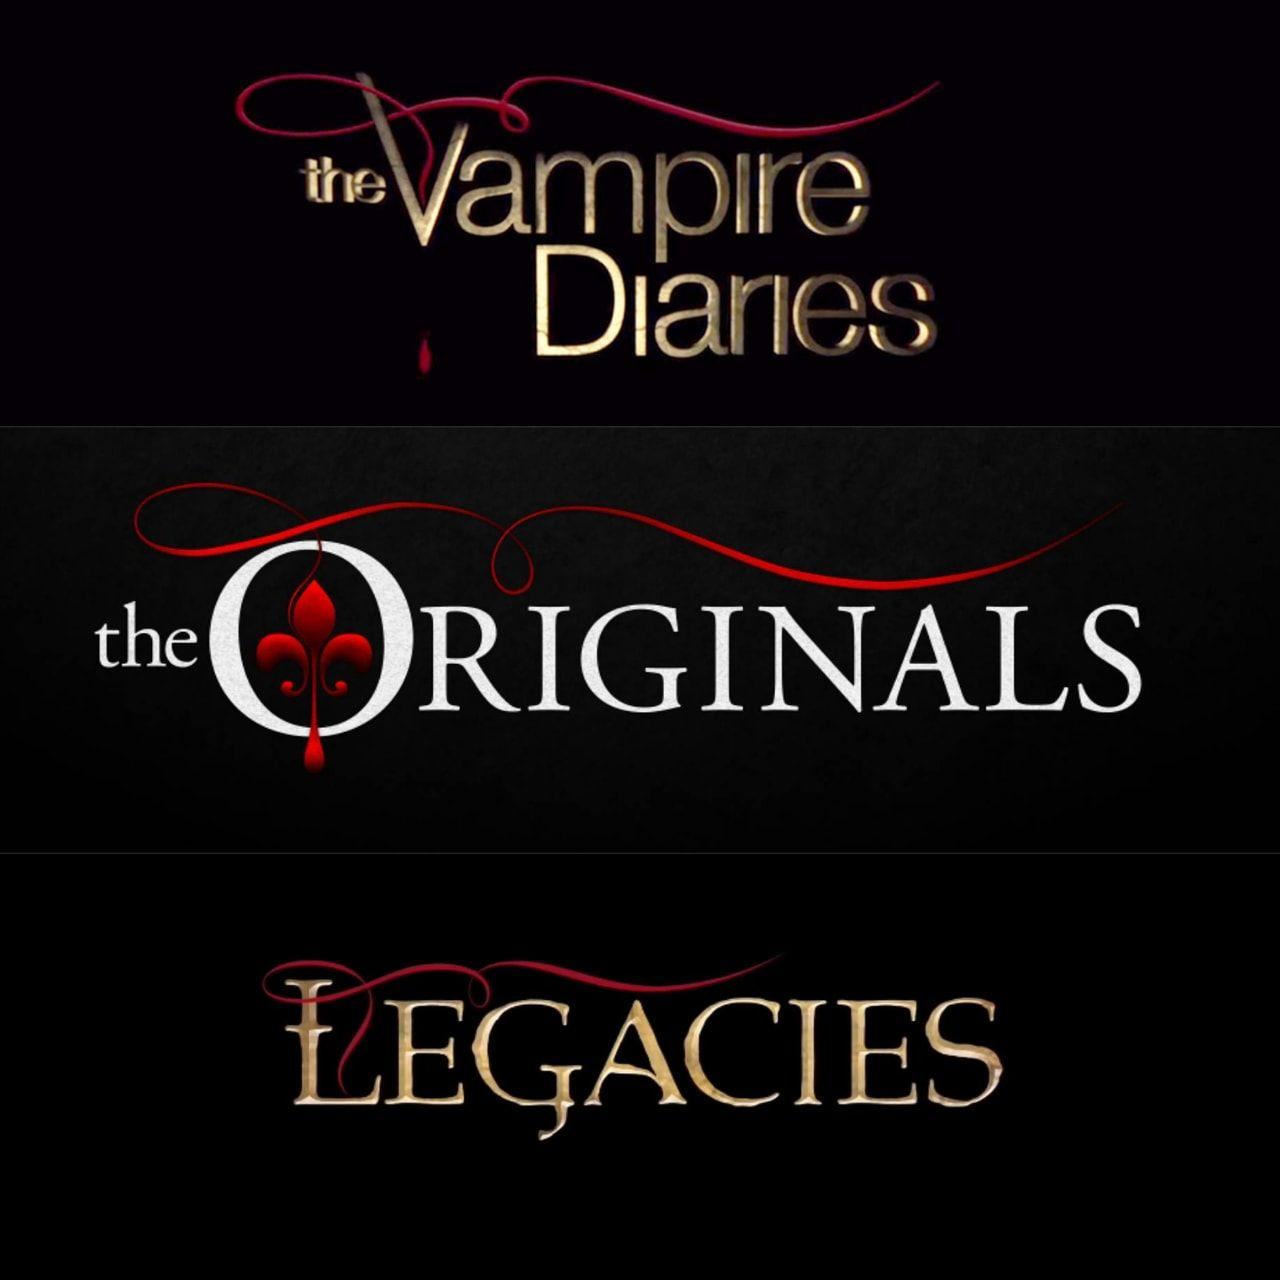 Vampire Original Logo - Image about text in WONDERFUL PICTURES